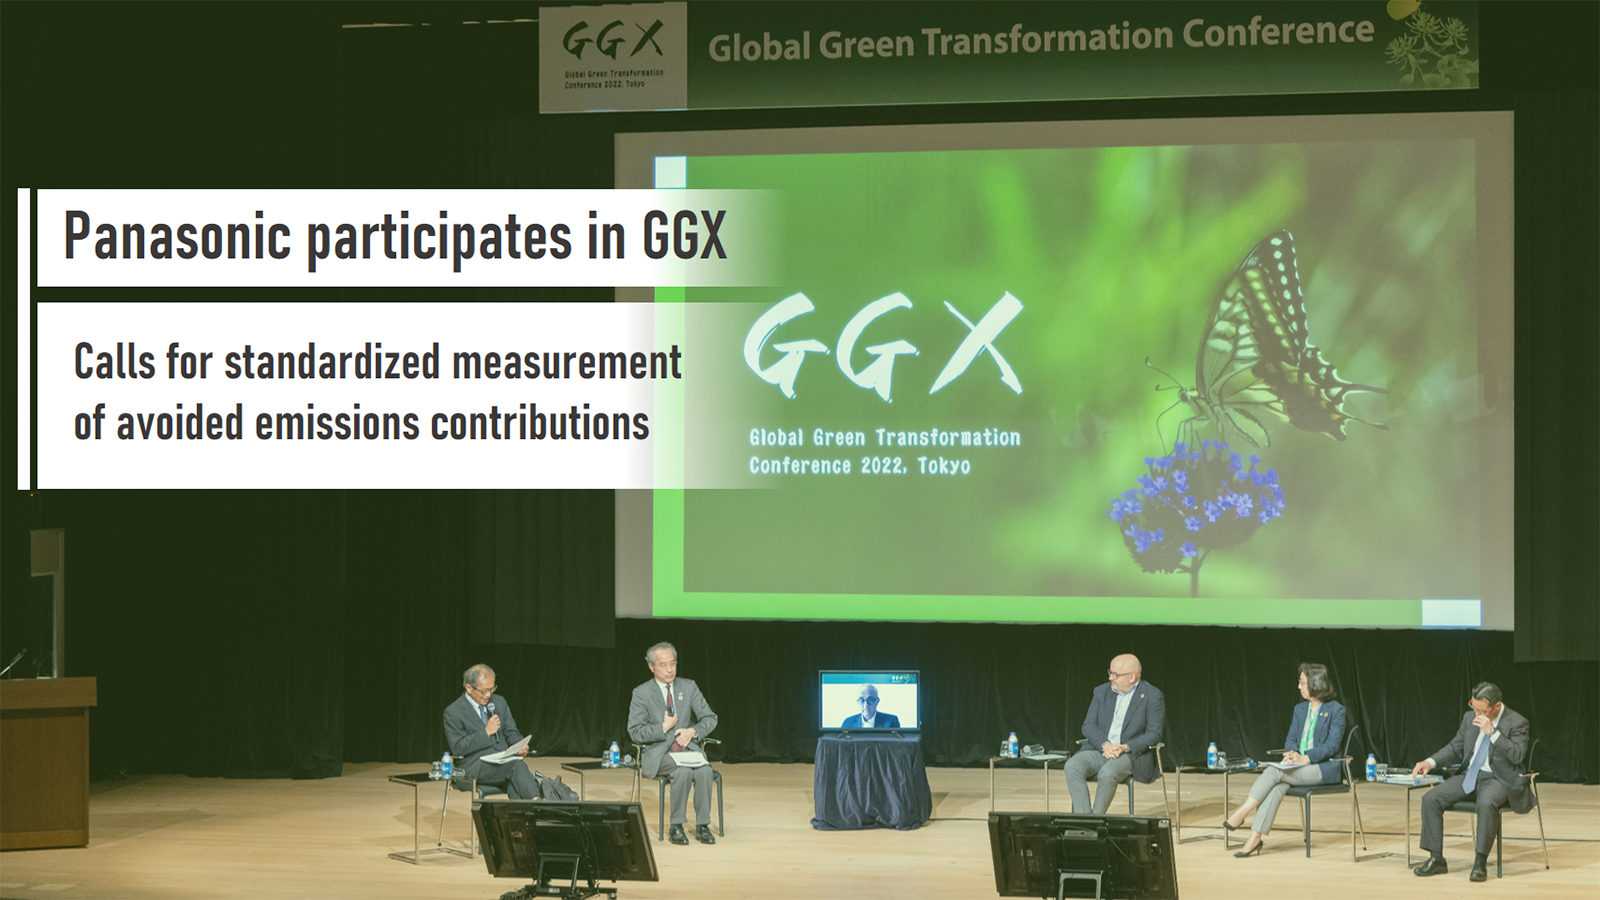 Panasonic Participates in Global Green Transformation Conference (GGX), Calls for Standardized Measurement of Avoided Emissions Contributions